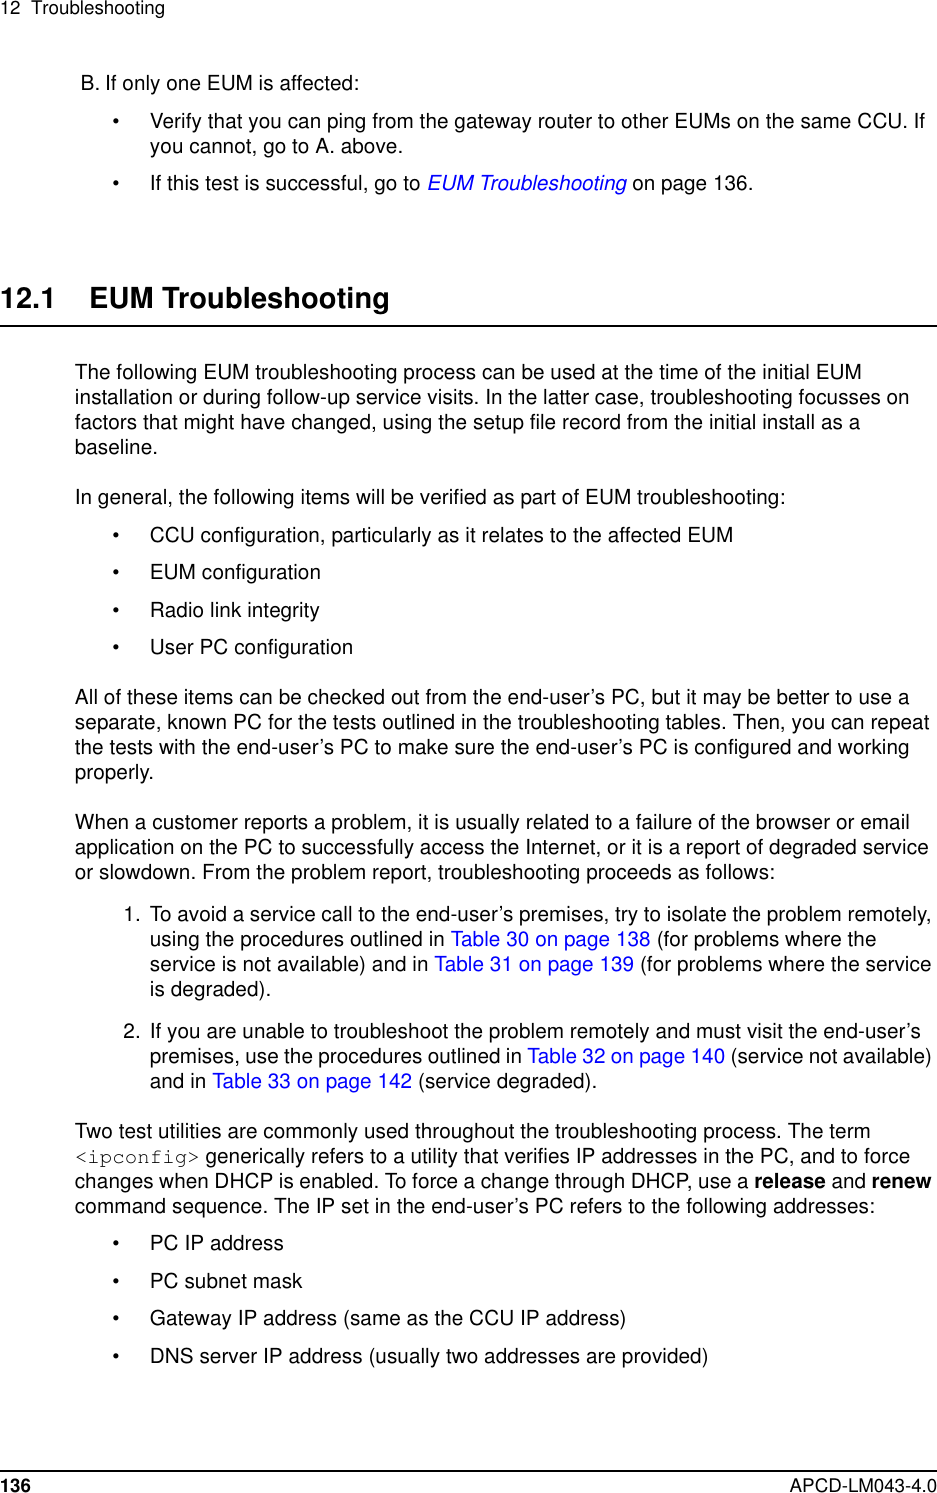 12 Troubleshooting136 APCD-LM043-4.0B. If only one EUM is affected:• Verify that you can ping from the gateway router to other EUMs on the same CCU. Ifyou cannot, go to A. above.• Ifthistestissuccessful,gotoEUM Troubleshooting on page 136.12.1 EUM TroubleshootingThe following EUM troubleshooting process can be used at the time of the initial EUMinstallation or during follow-up service visits. In the latter case, troubleshooting focusses onfactors that might have changed, using the setup file record from the initial install as abaseline.In general, the following items will be verified as part of EUM troubleshooting:• CCU configuration, particularly as it relates to the affected EUM• EUM configuration• Radio link integrity• User PC configurationAll of these items can be checked out from the end-user’s PC, but it may be better to use aseparate, known PC for the tests outlined in the troubleshooting tables. Then, you can repeatthe tests with the end-user’s PC to make sure the end-user’s PC is configured and workingproperly.When a customer reports a problem, it is usually related to a failure of the browser or emailapplication on the PC to successfully access the Internet, or it is a report of degraded serviceor slowdown. From the problem report, troubleshooting proceeds as follows:1. To avoid a service call to the end-user’s premises, try to isolate the problem remotely,using the procedures outlined in Table30onpage138(for problems where theservice is not available) and in Table 31 on page 139 (for problems where the serviceis degraded).2. If you are unable to troubleshoot the problem remotely and must visit the end-user’spremises, use the procedures outlined in Table32onpage140(service not available)and in Table 33 on page 142 (service degraded).Two test utilities are commonly used throughout the troubleshooting process. The term&lt;ipconfig&gt; generically refers to a utility that verifies IP addresses in the PC, and to forcechanges when DHCP is enabled. To force a change through DHCP, use a release and renewcommand sequence. The IP set in the end-user’s PC refers to the following addresses:• PC IP address• PC subnet mask• Gateway IP address (same as the CCU IP address)• DNS server IP address (usually two addresses are provided)